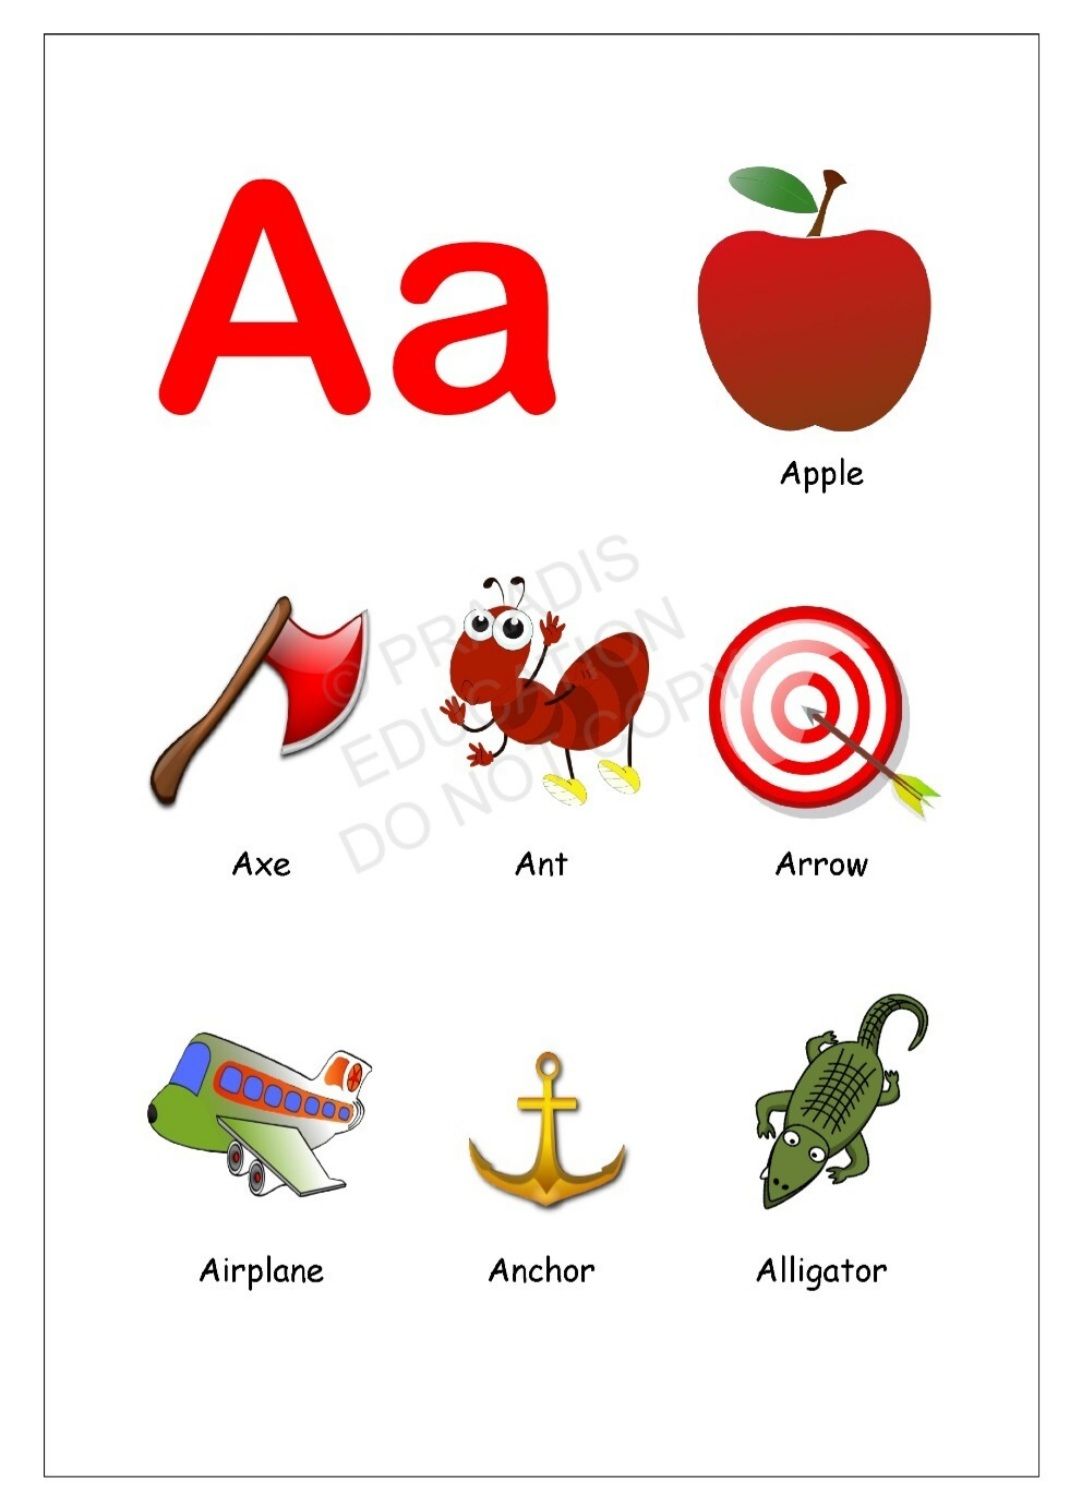 Read A,B,C,D and E letter Words - All Subjects - Assignment ...